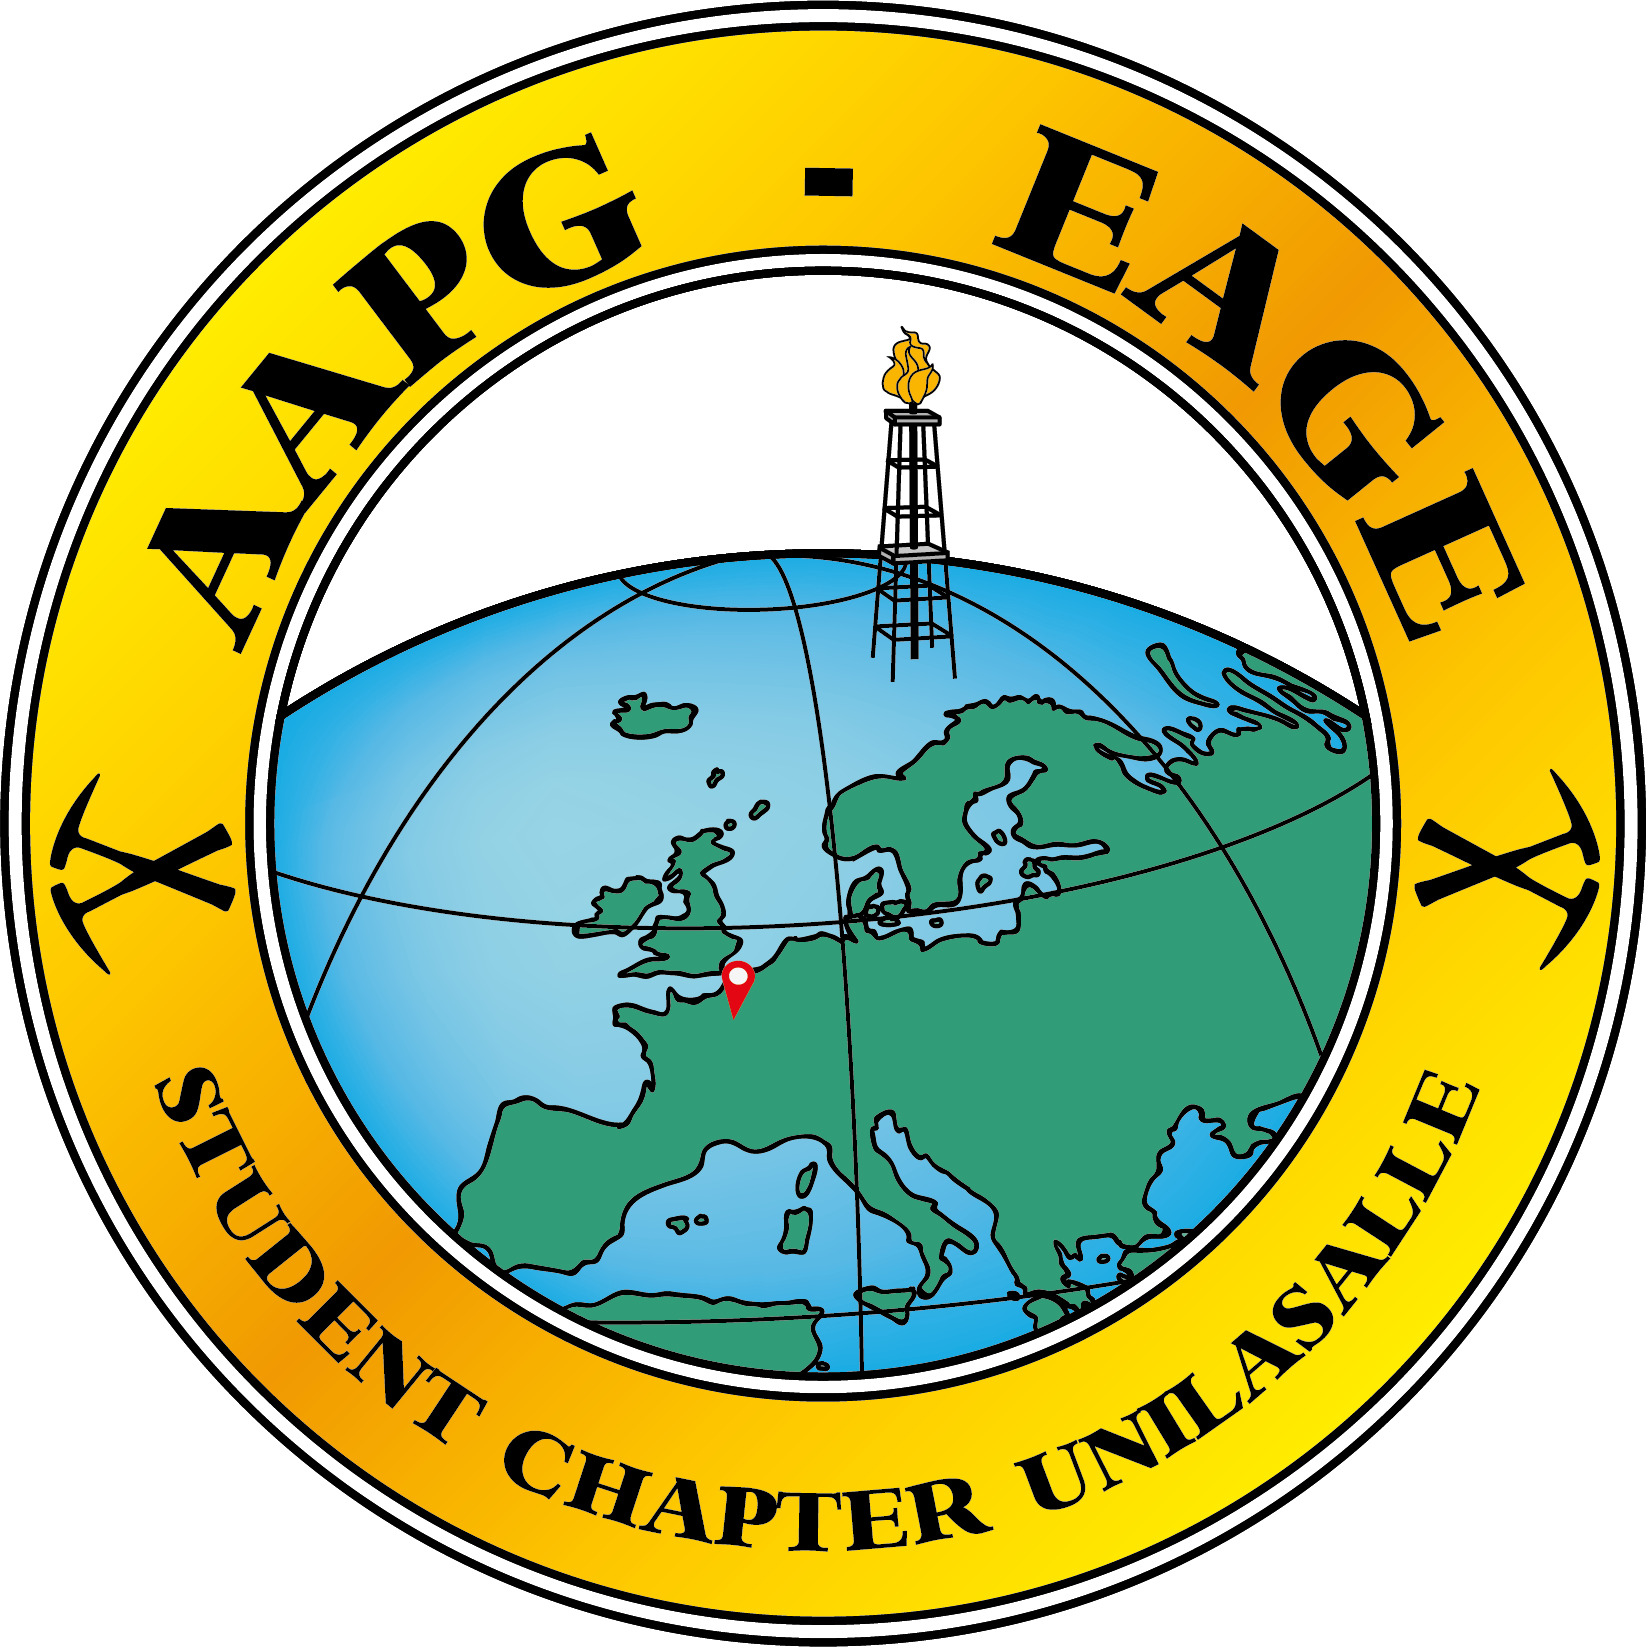 AAPG-EAGE Student Chapter – UniLaSalle